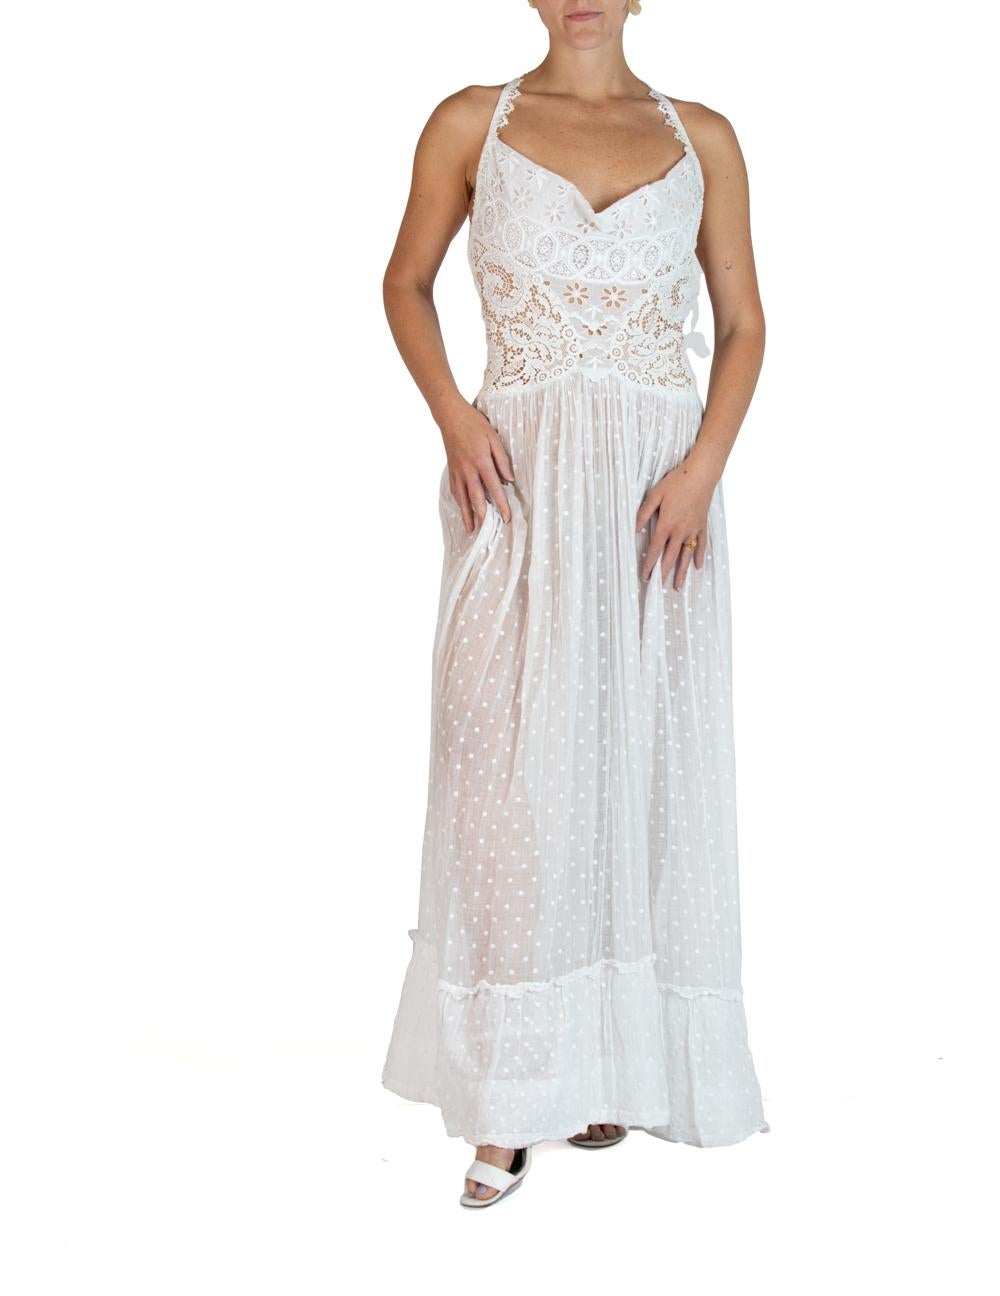 MORPHEW ATELIER White Organic Cotton With Victorian Lace & Dotted Voile Gown For Sale 2